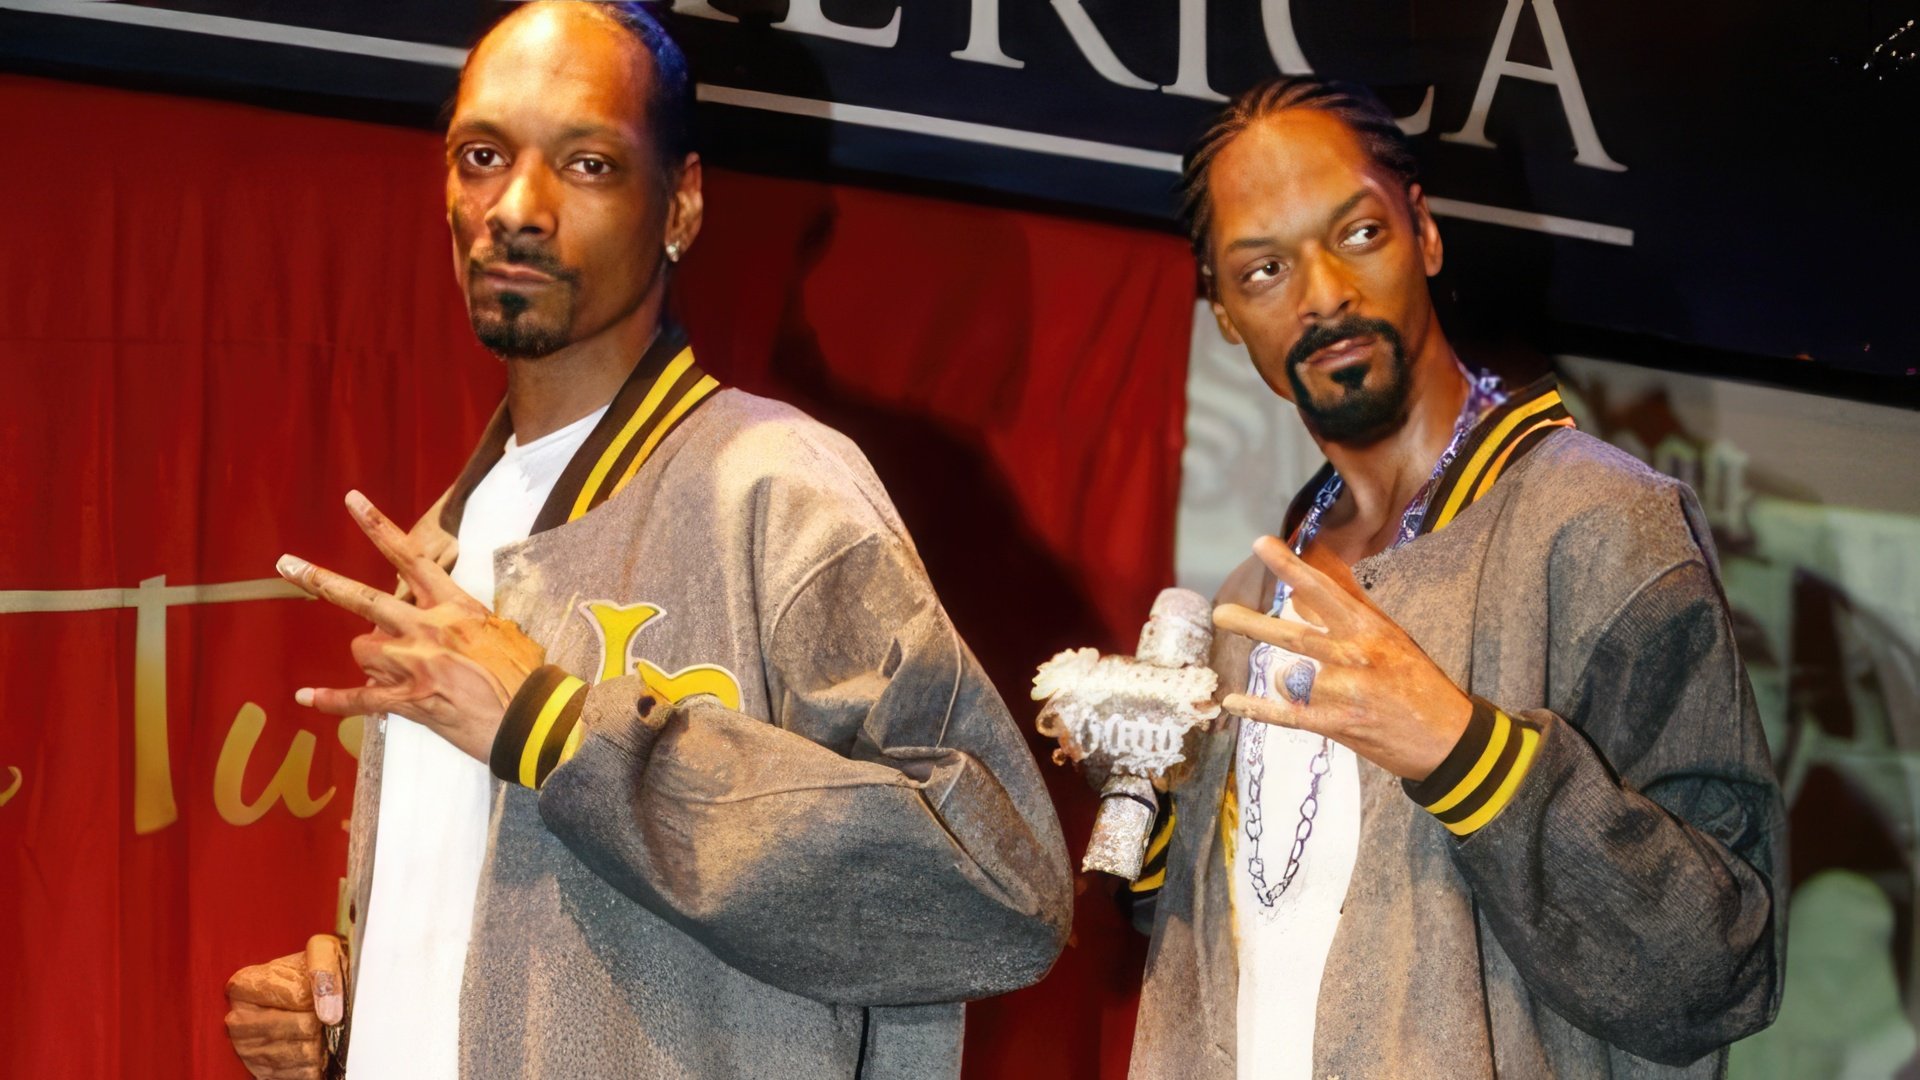 Snoop Dogg and his wax figure at Madame Tussauds museum